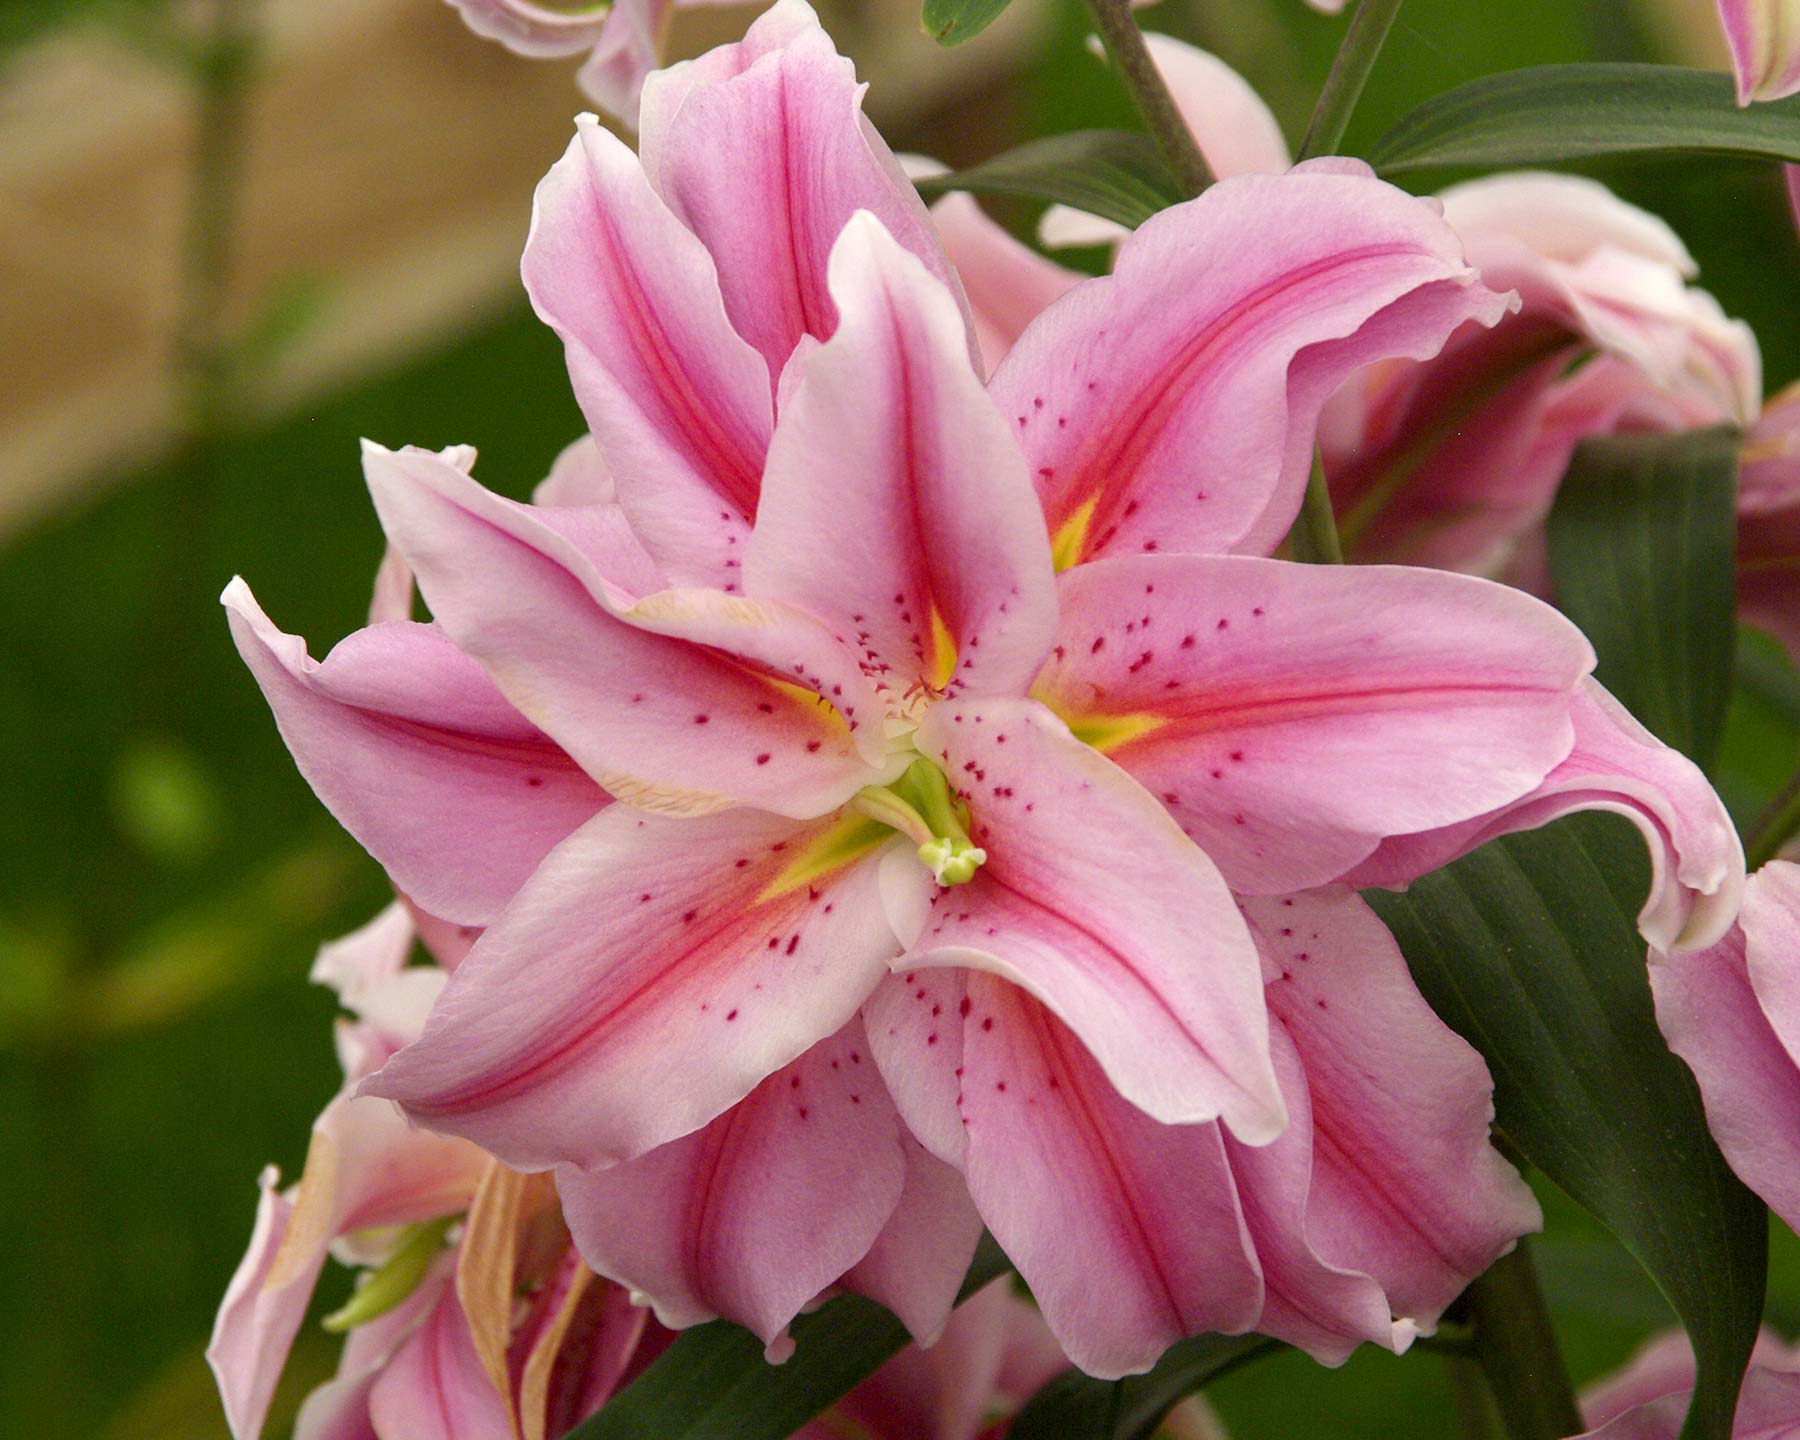 Lilium Oriental Hybrid Double Felicia - double bowl shaped flowers pink with a deep pink central band